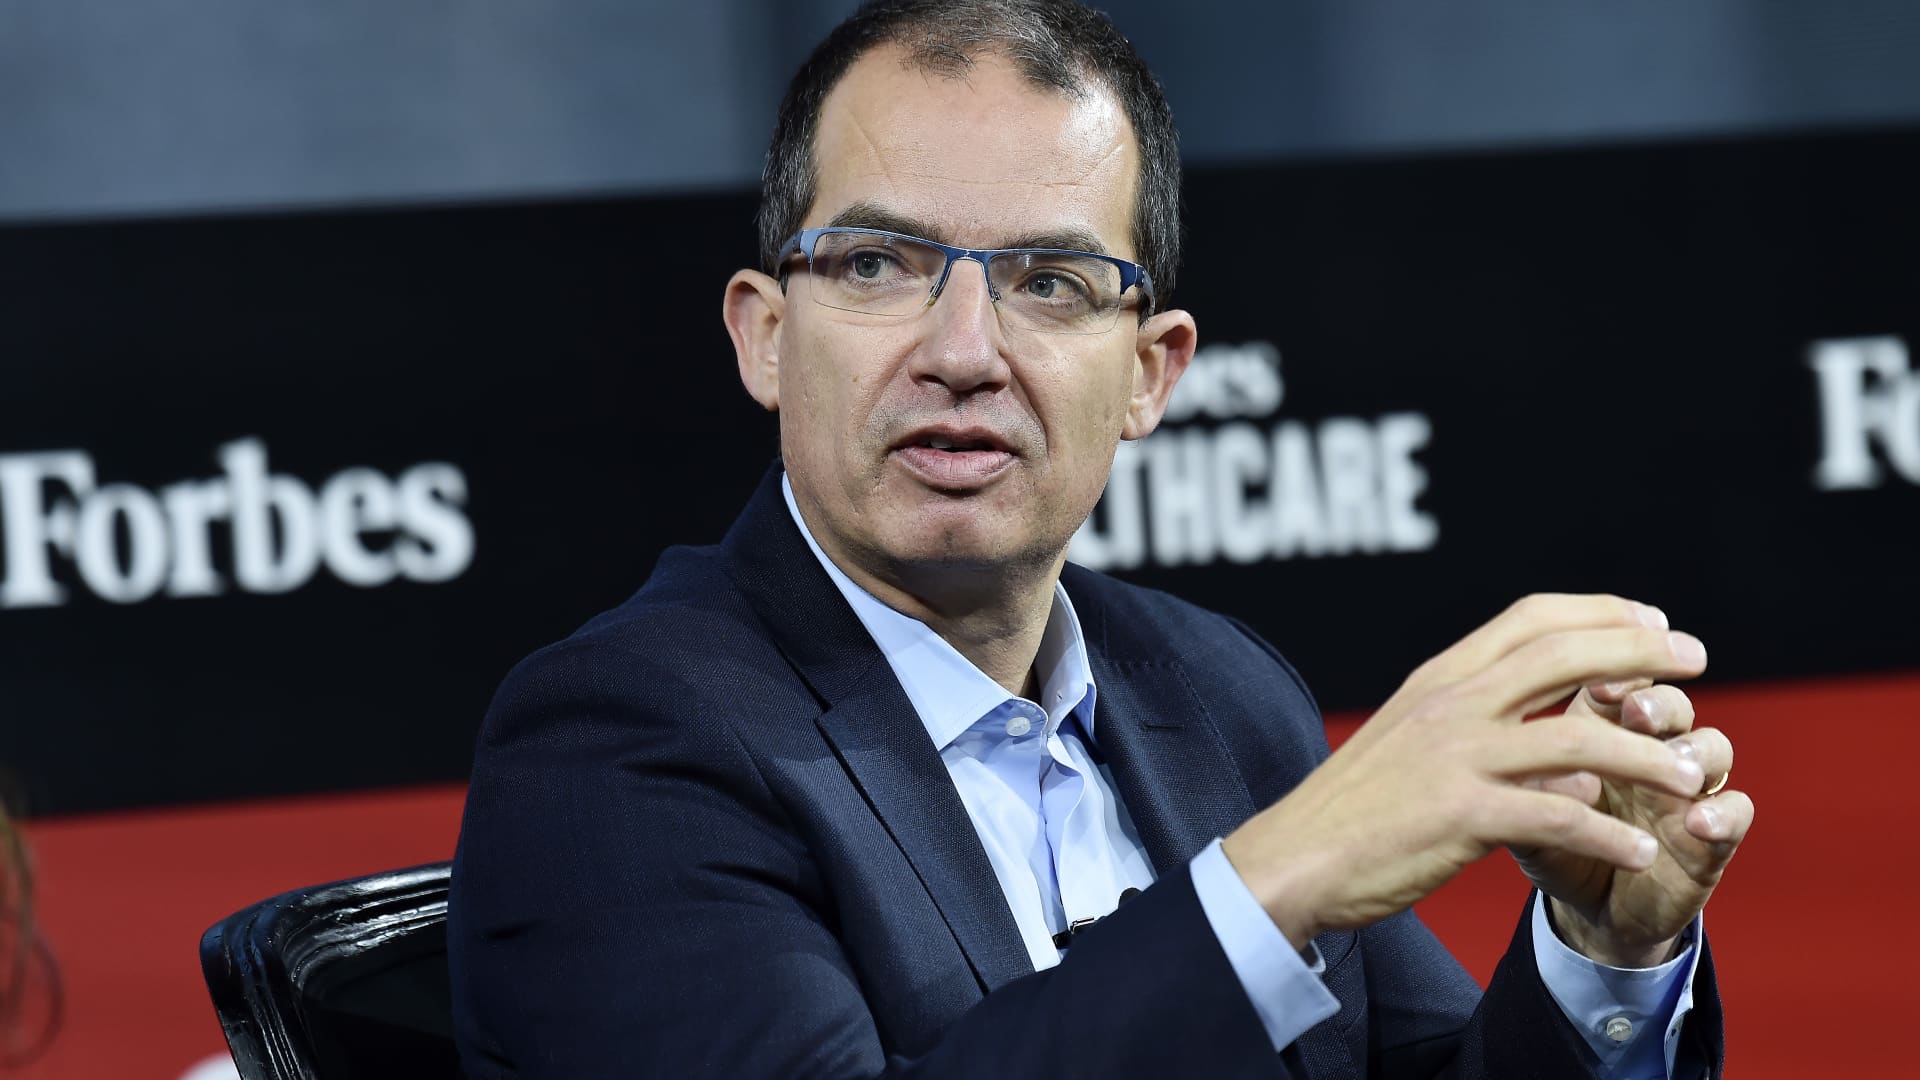 Moderna CEO Stephane Bancel has sold more than $400 million of company stock during the pandemic – CNBC